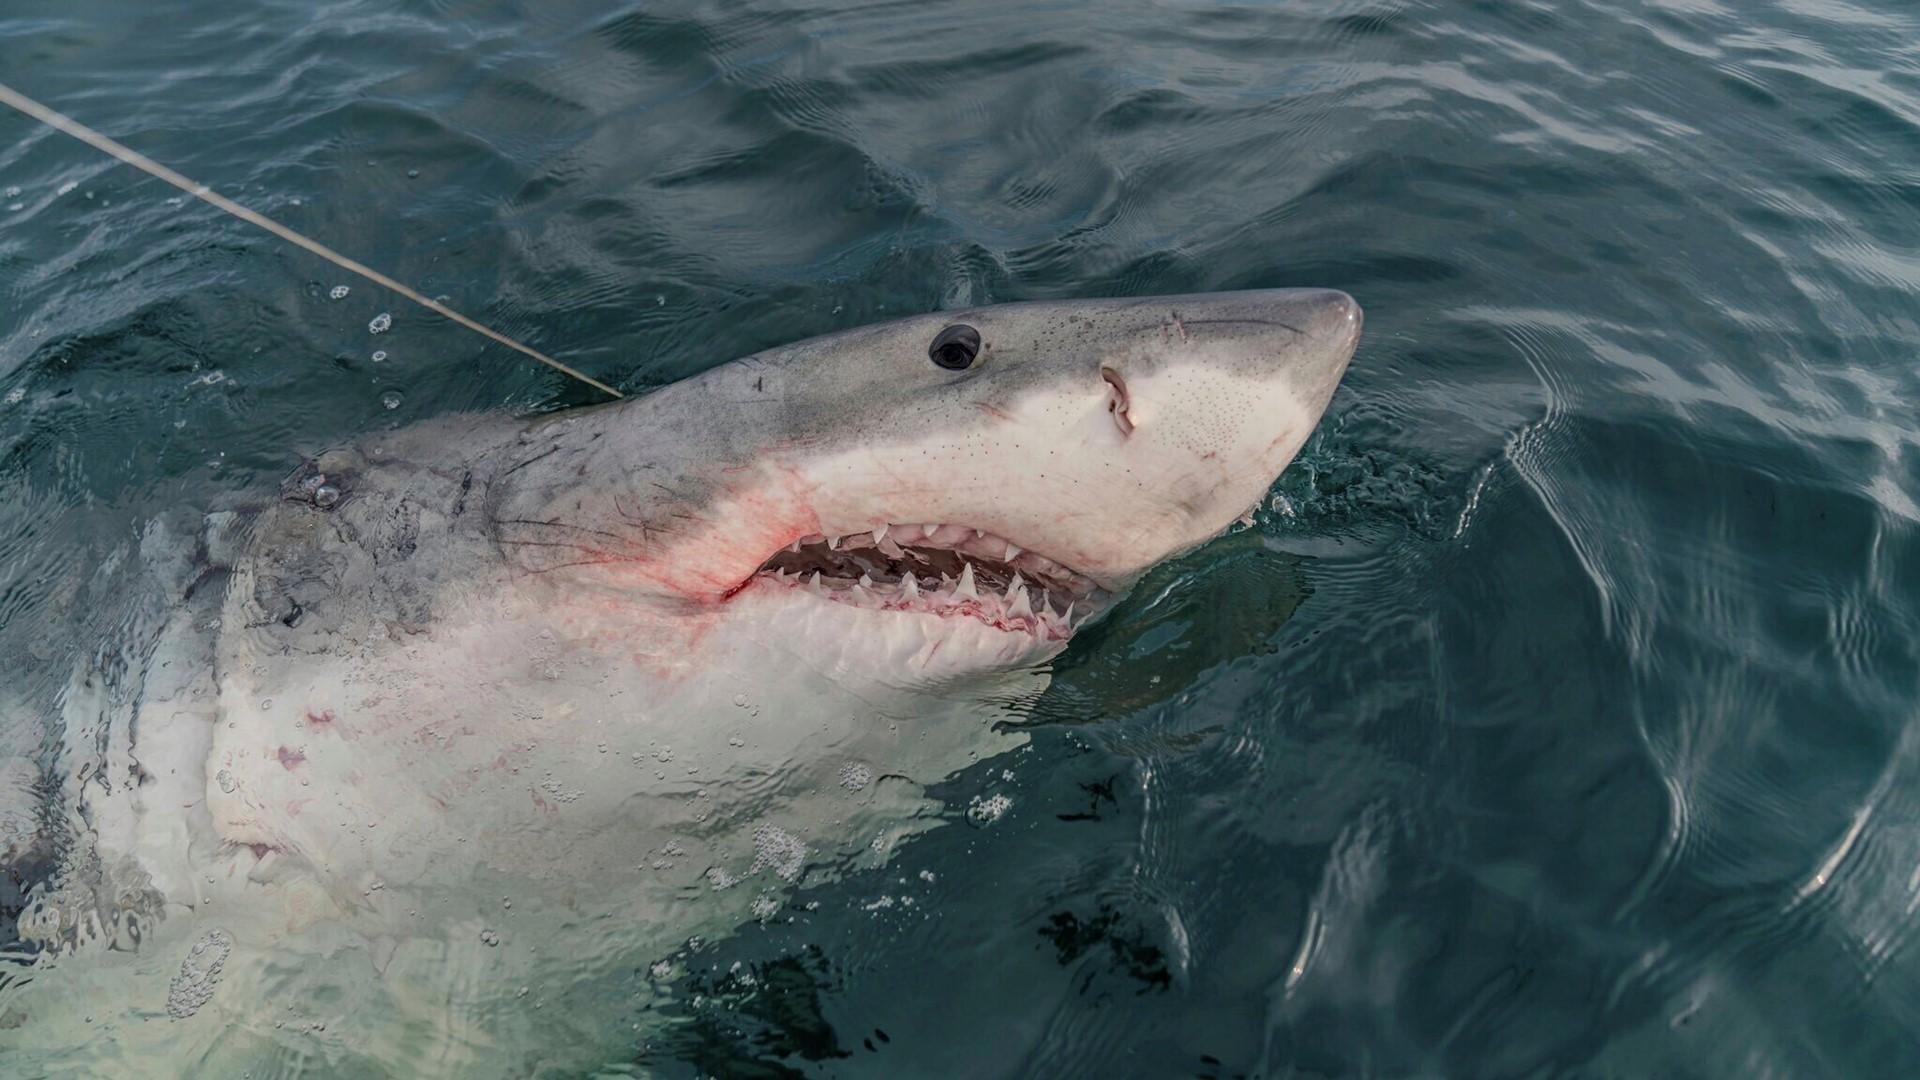 A 14-foot Great White shark named LeeBeth has traveled more than 2,000 miles into the western Gulf of Mexico since she was first tagged off South Carolina.